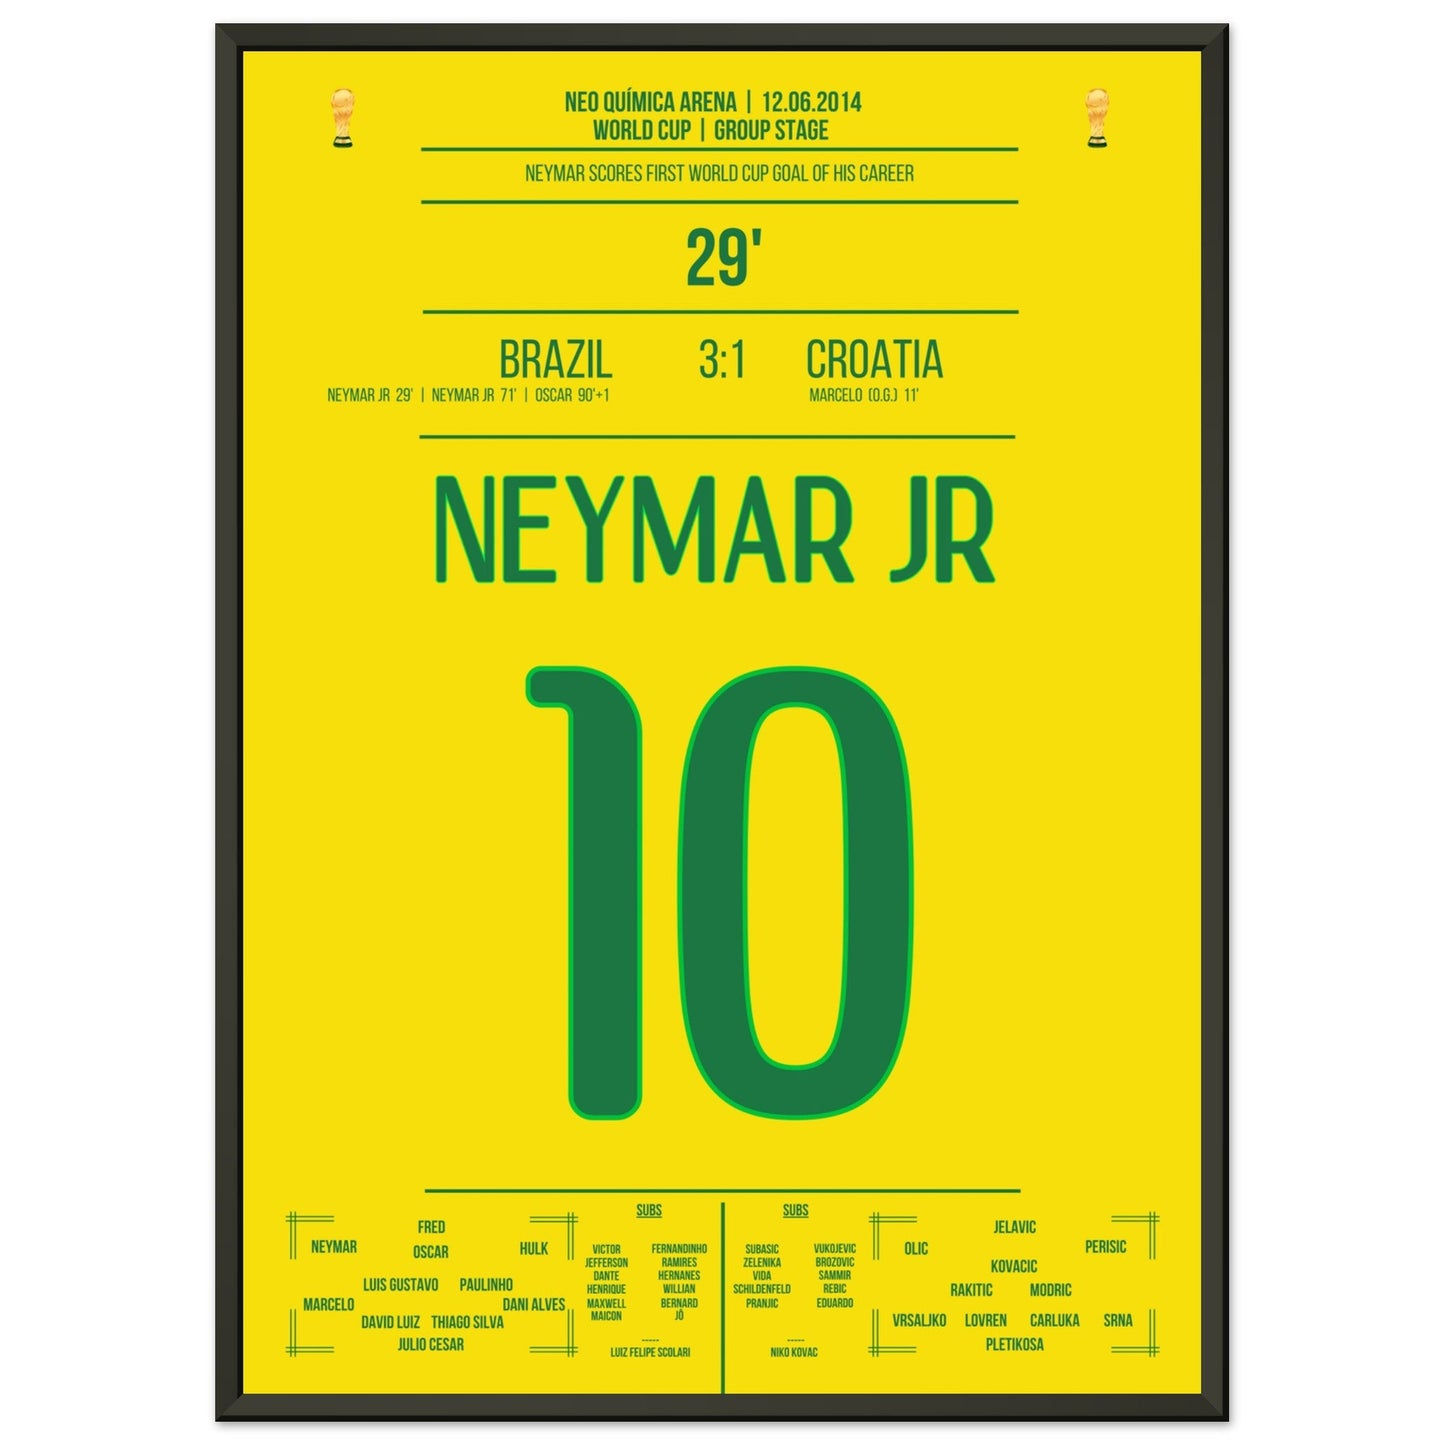 Neymar scores his first goal at a World Cup in 2014